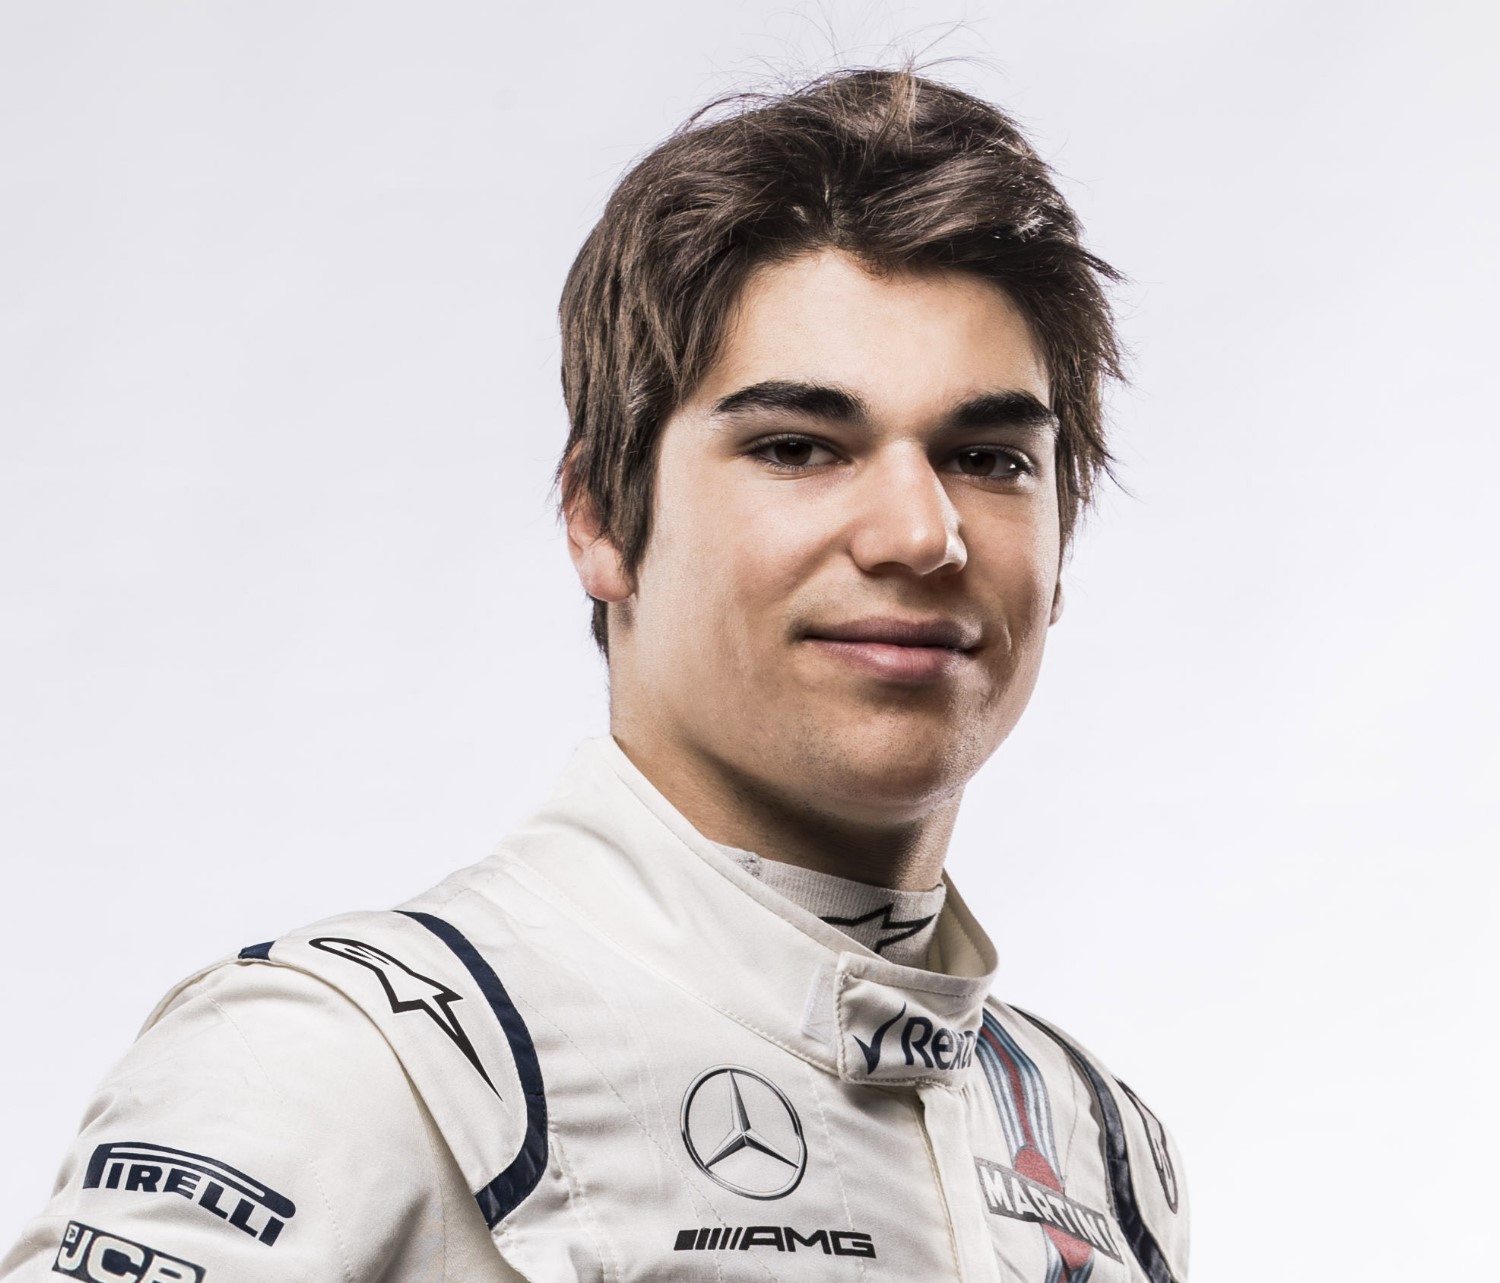 Mercedes' drivers like Lance Stroll will have less excuses now